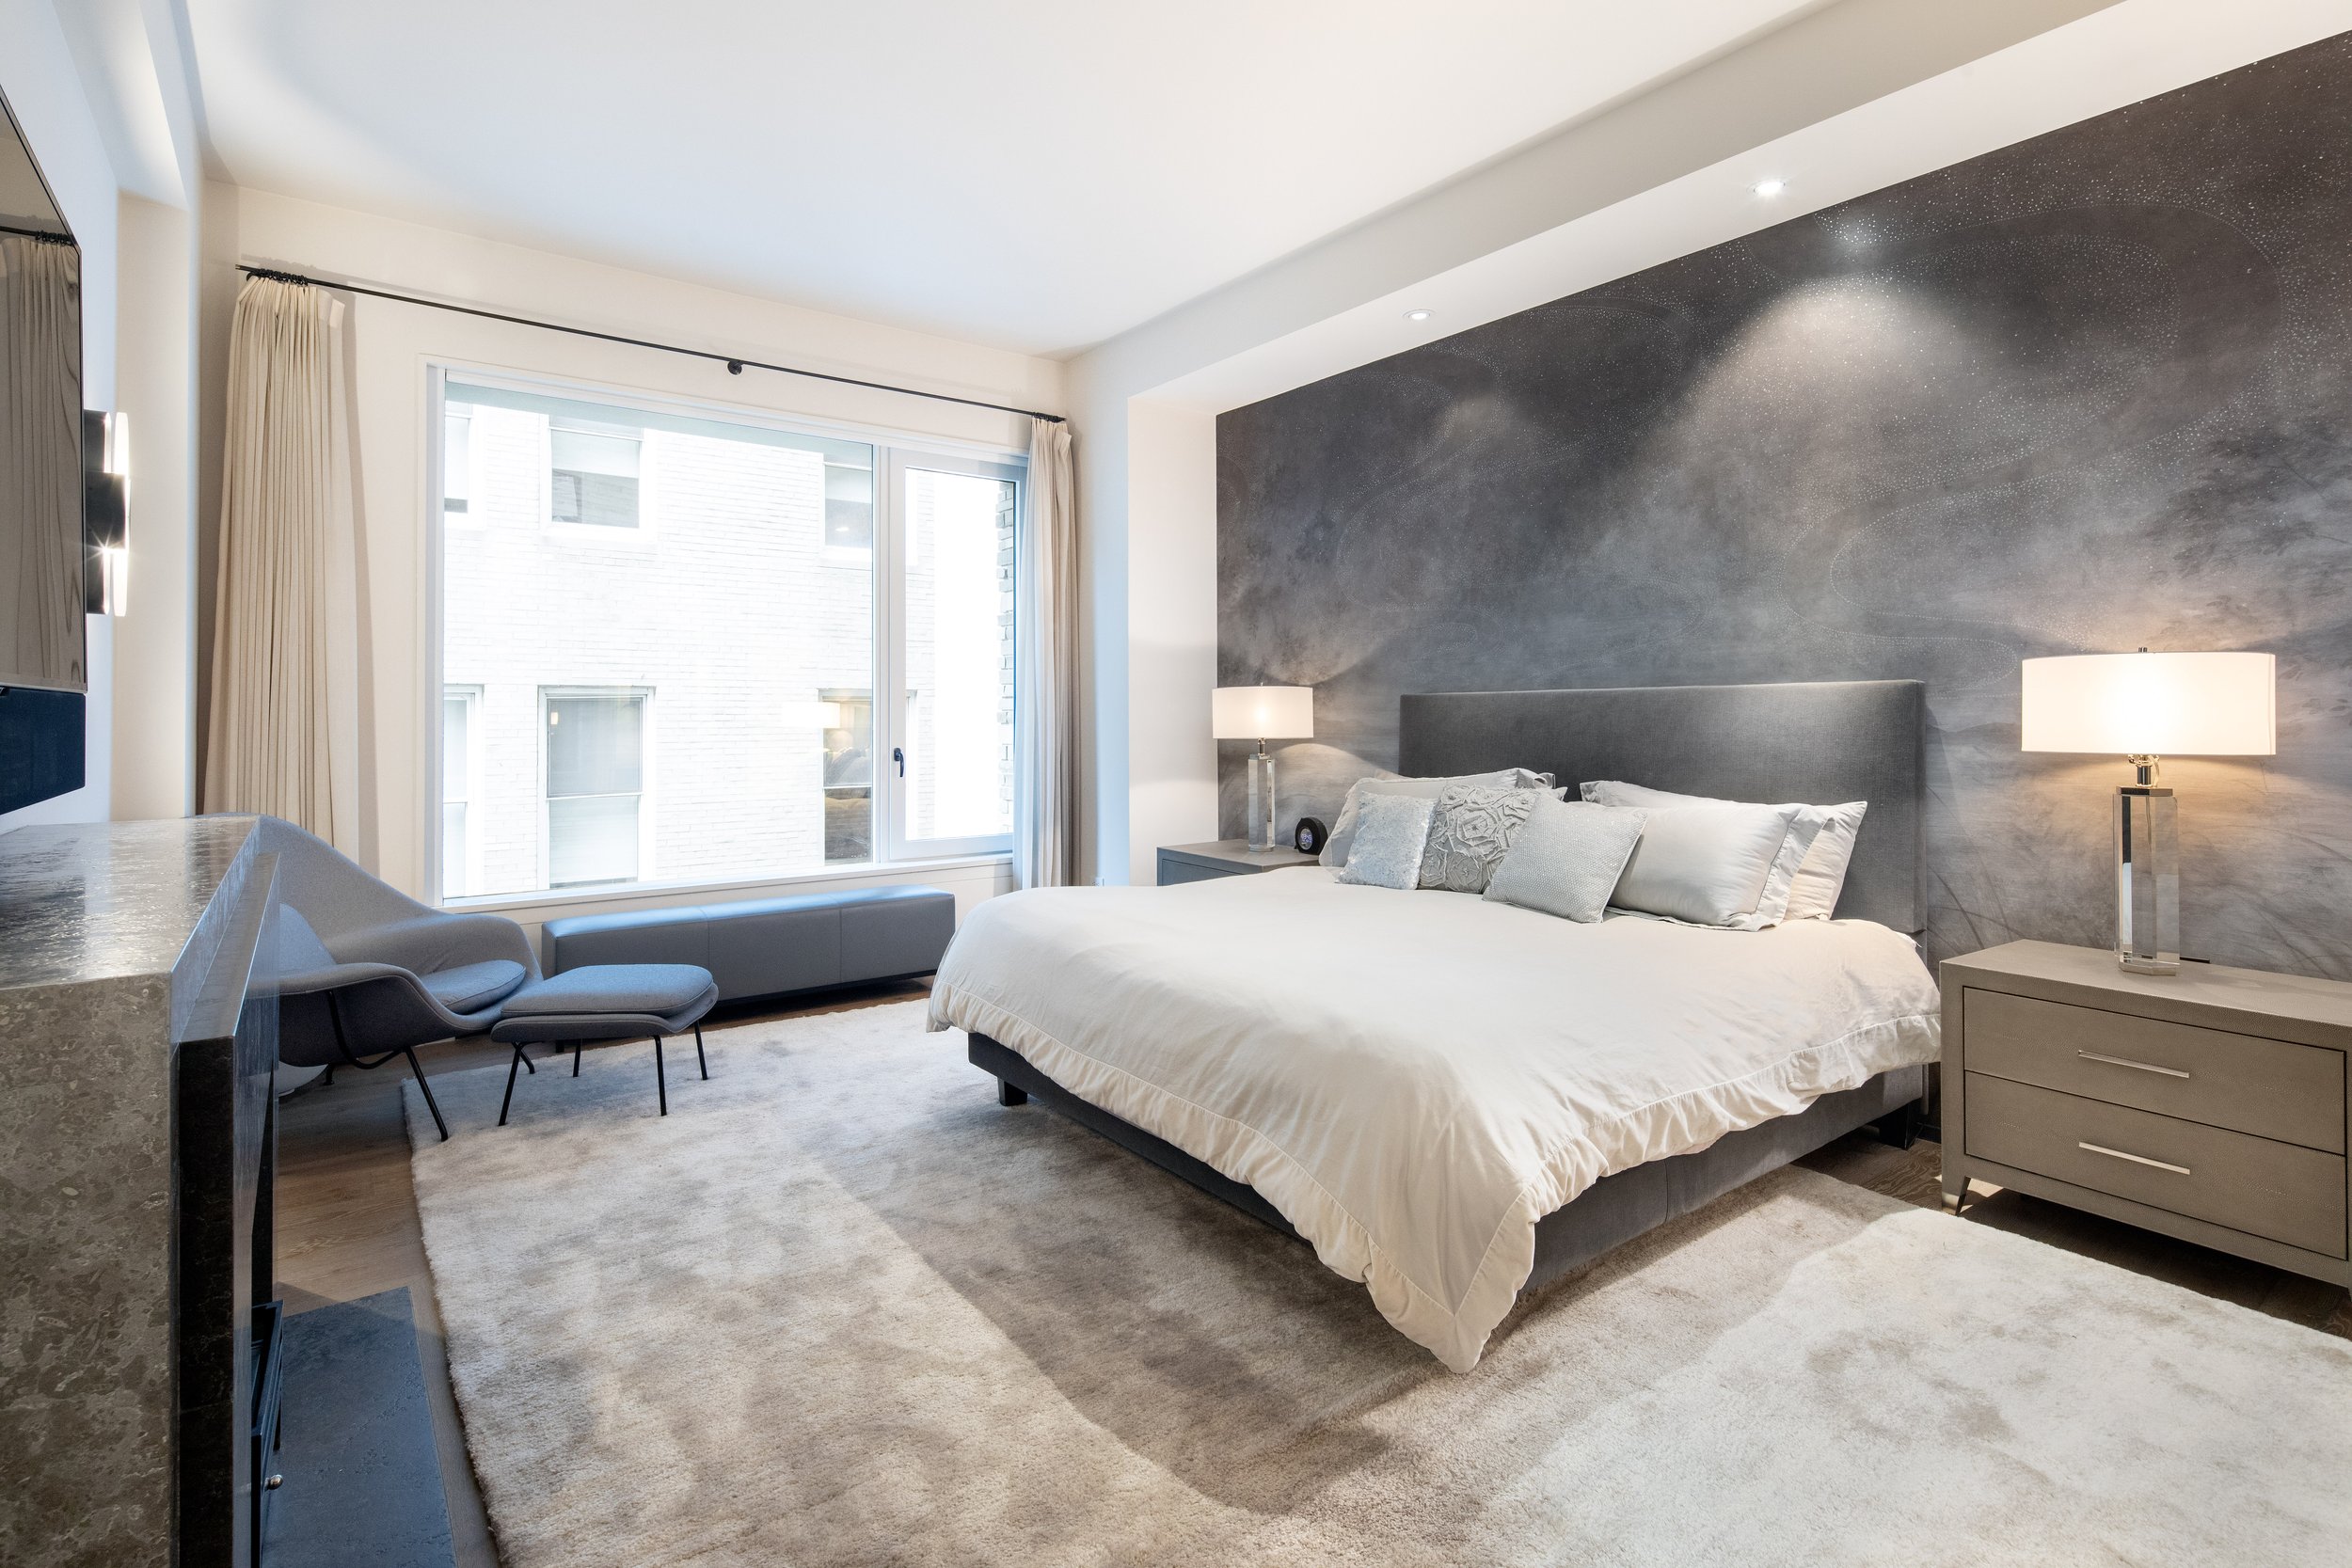  The Primary Suite boasts a fireplace and massive, dream Dressing Room with custom oak millwork and a wall of antiqued mirror closets. Pass through the Dressing Room into a five-fixture Bathroom with Carrera marble and bluestone finishes, deep soakin